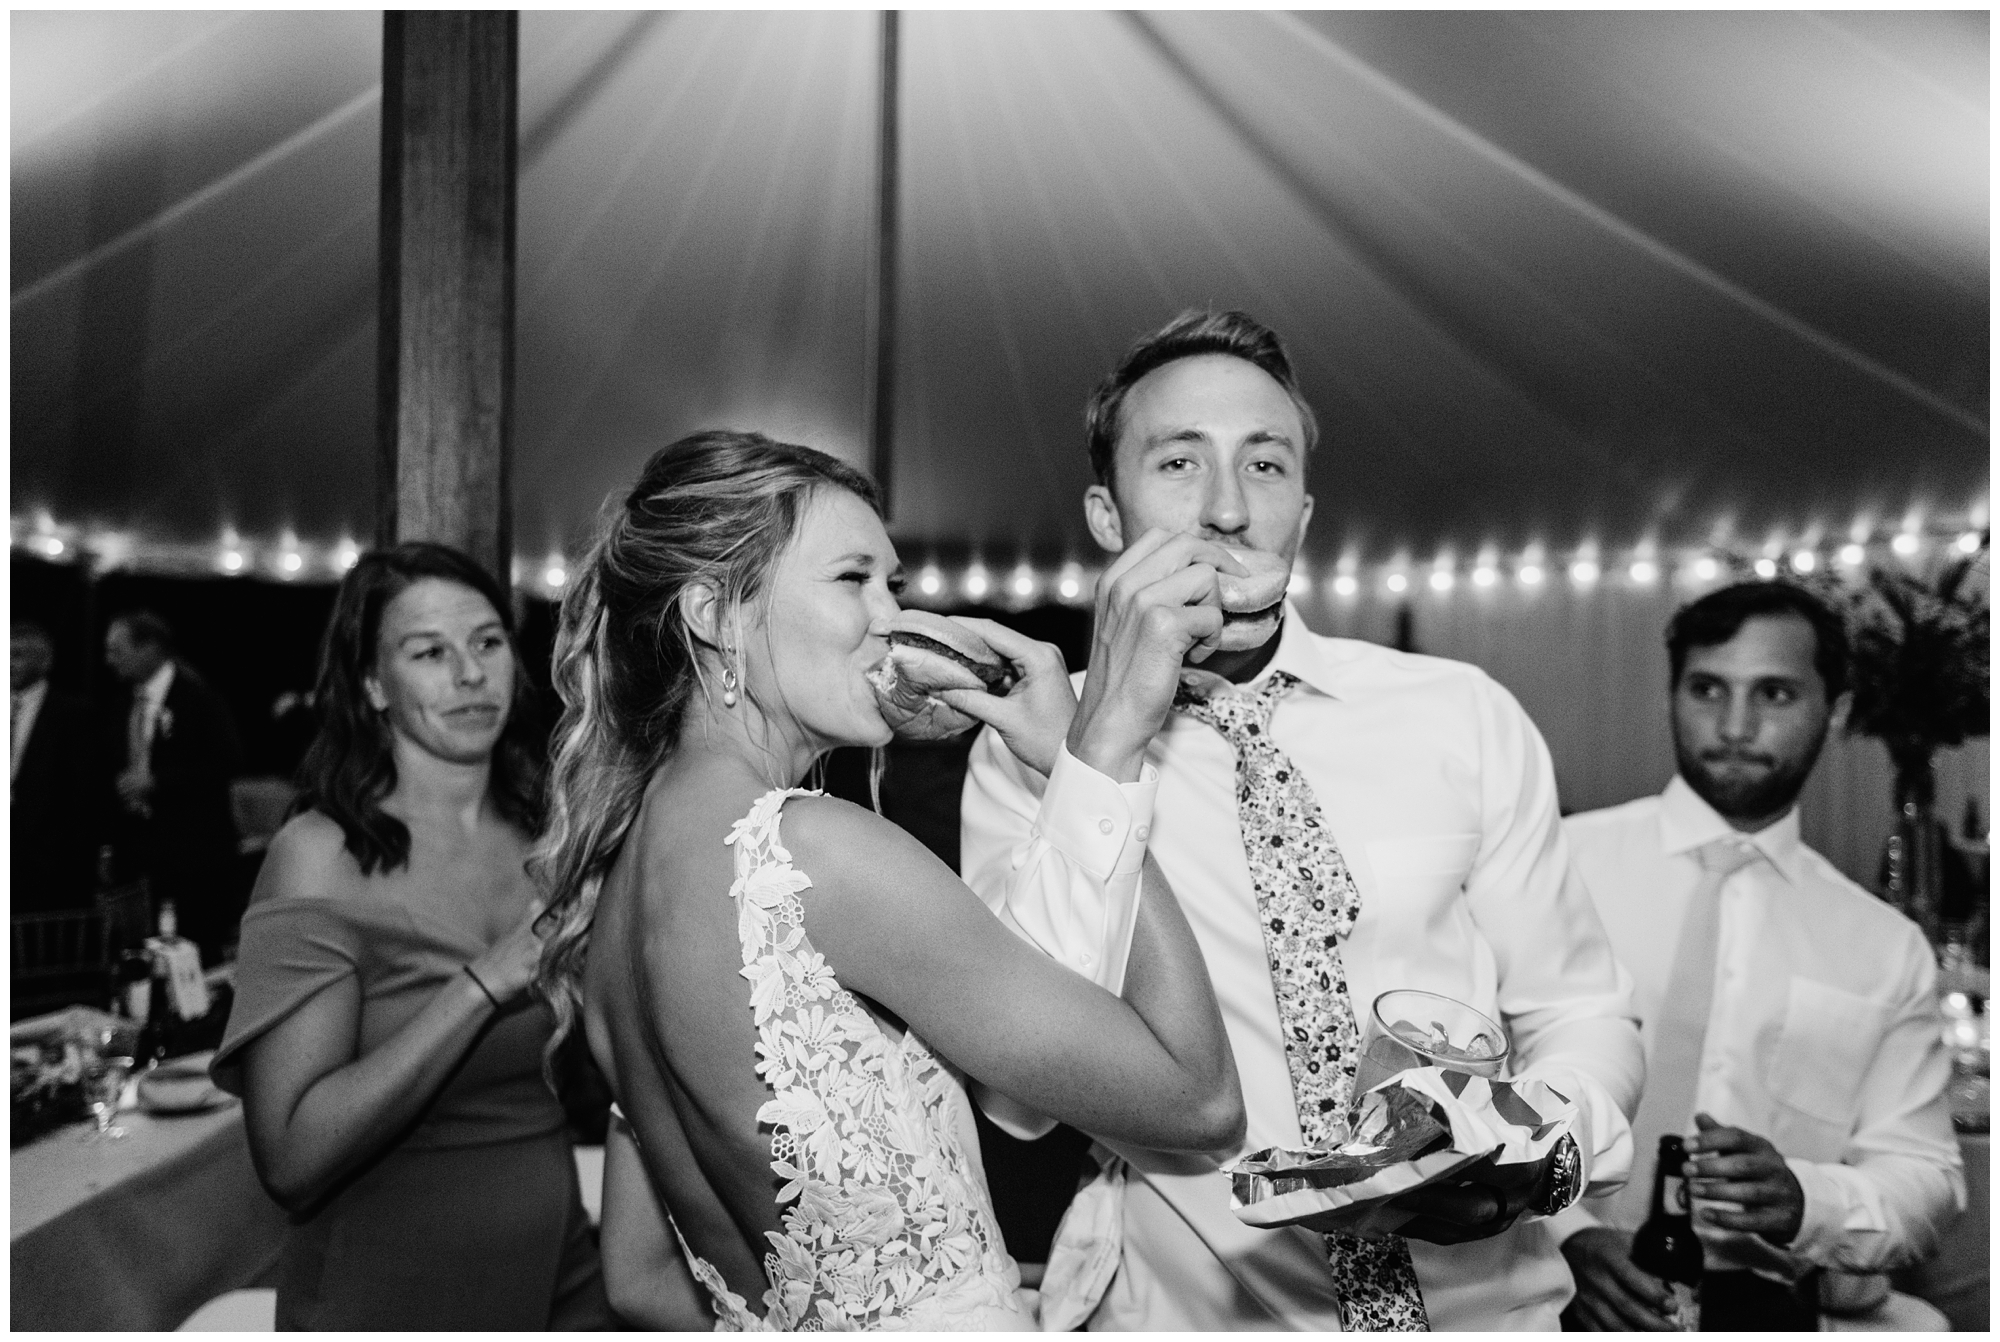 Couple eating Chick Fil A at their wedding reception